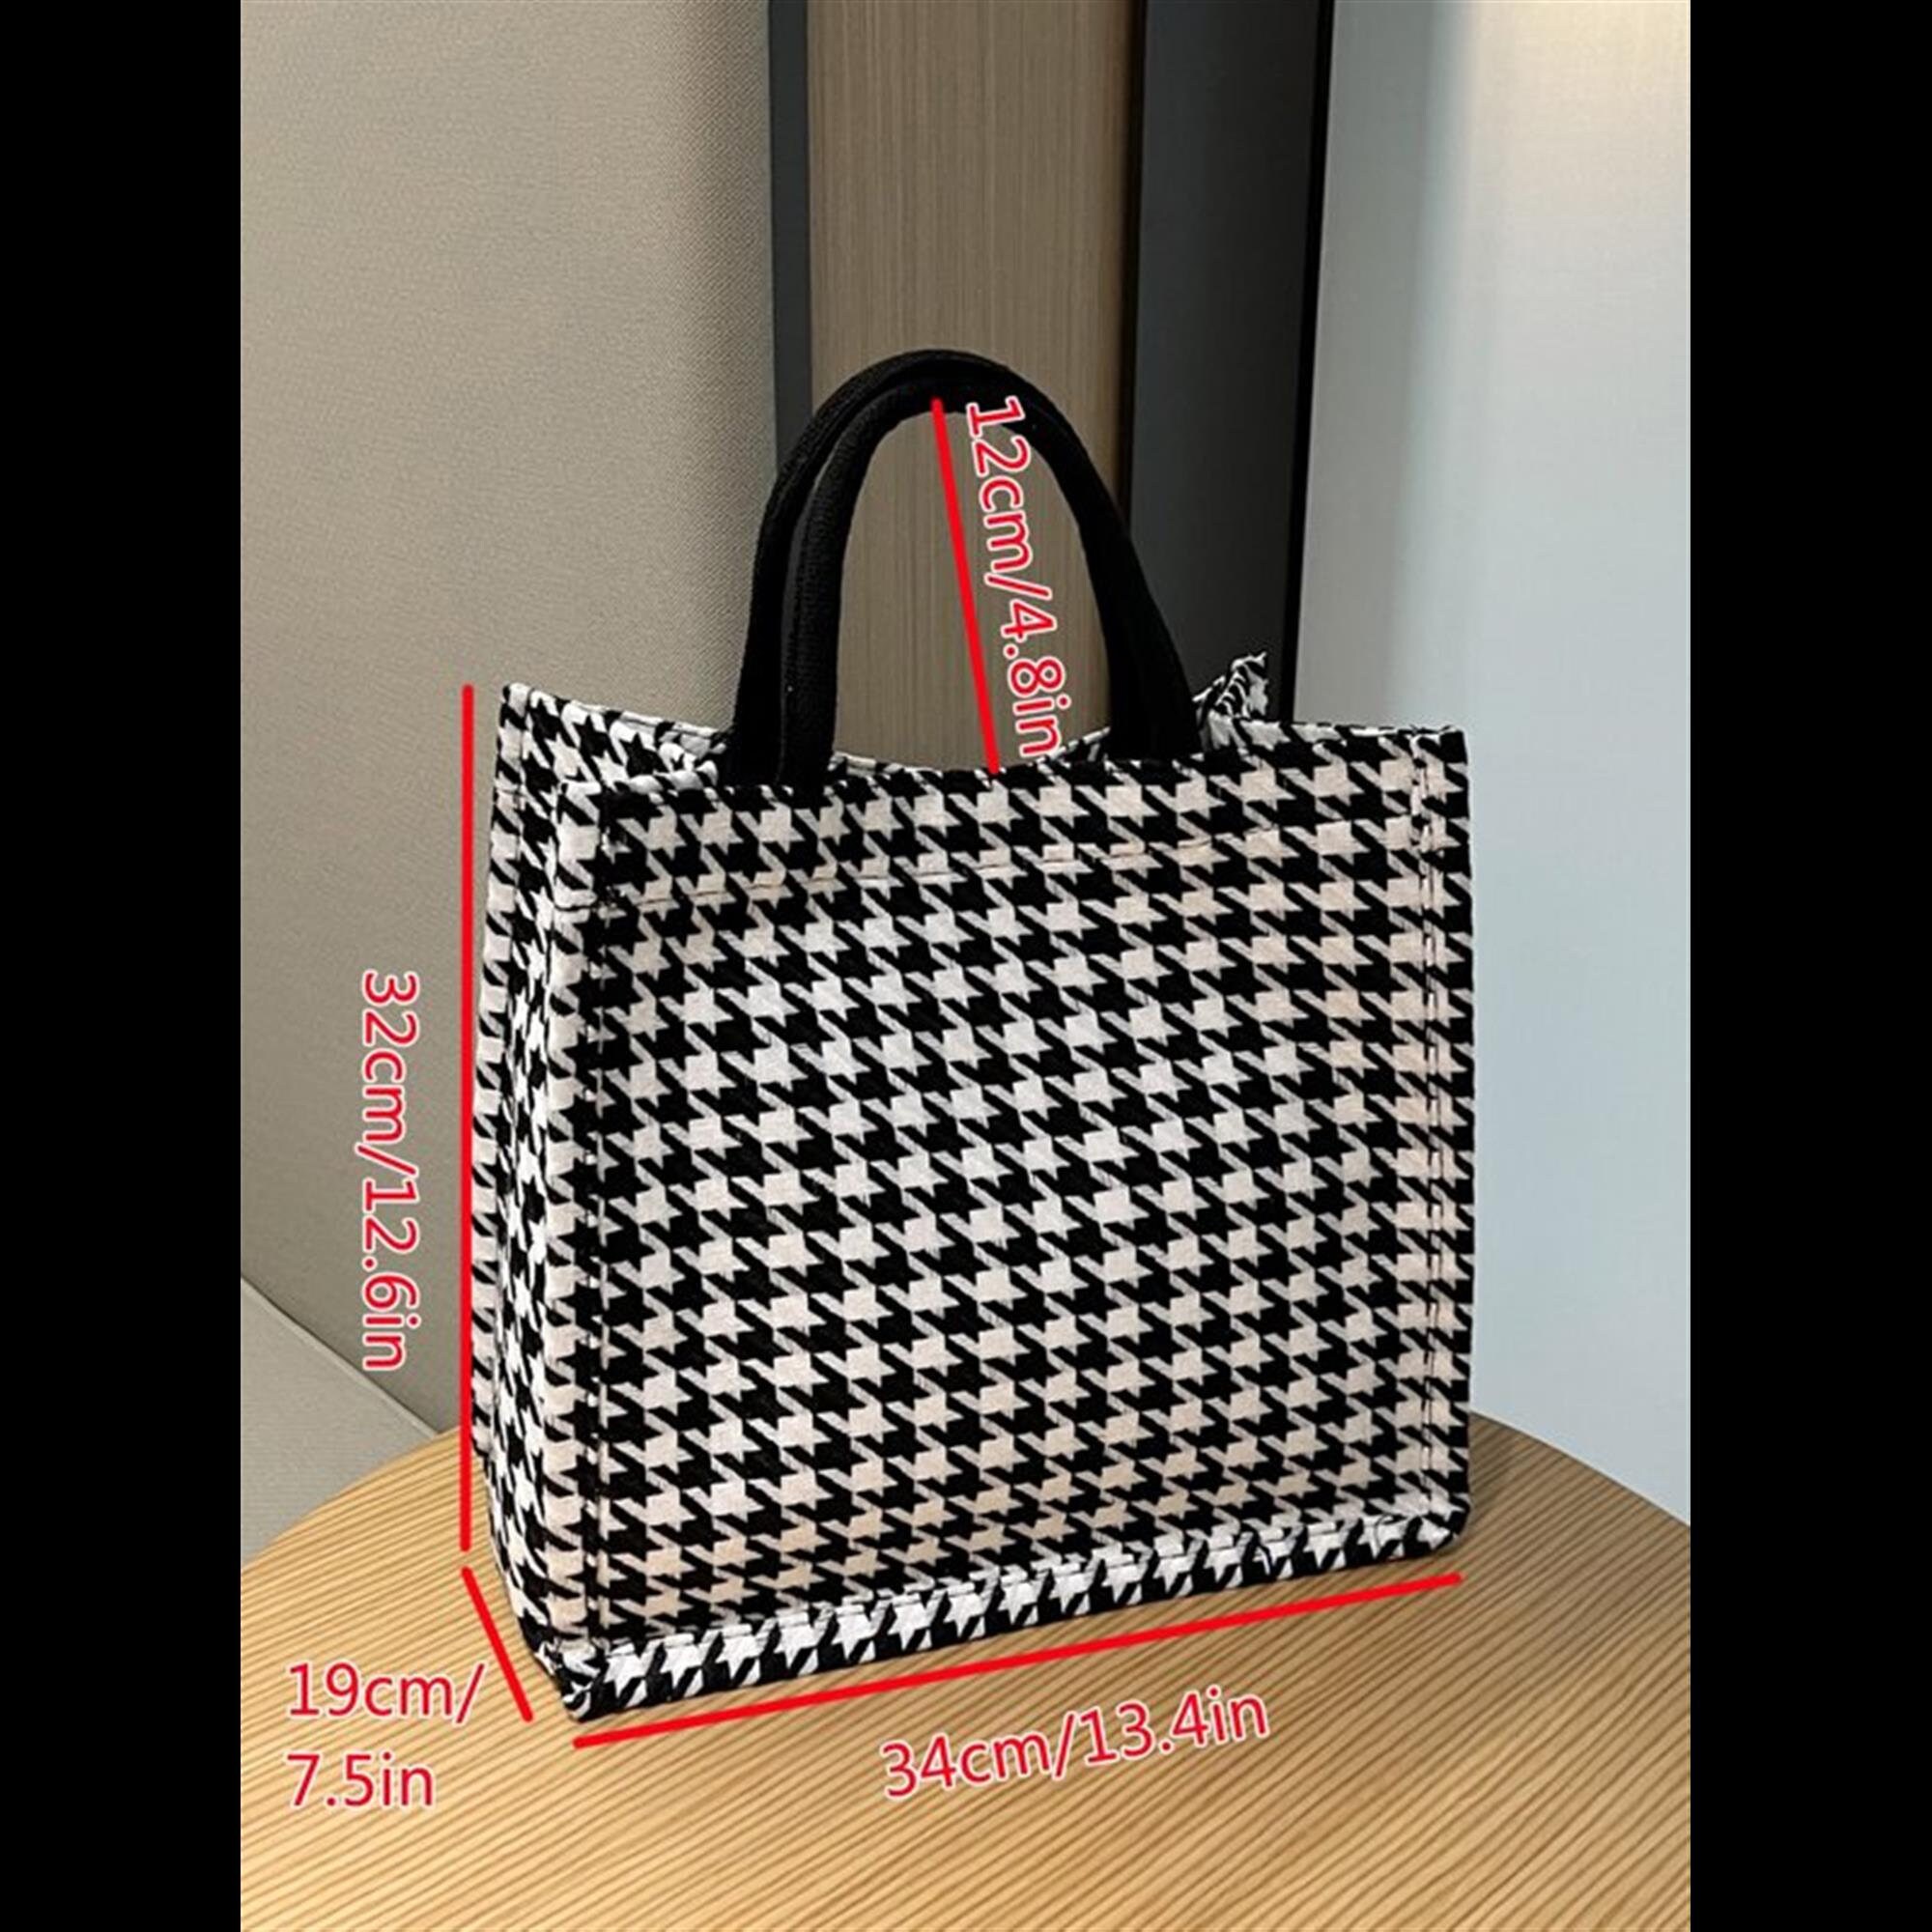 Houndstooth Pattern Top Handle Bag, Mothers Day Gift For Mom